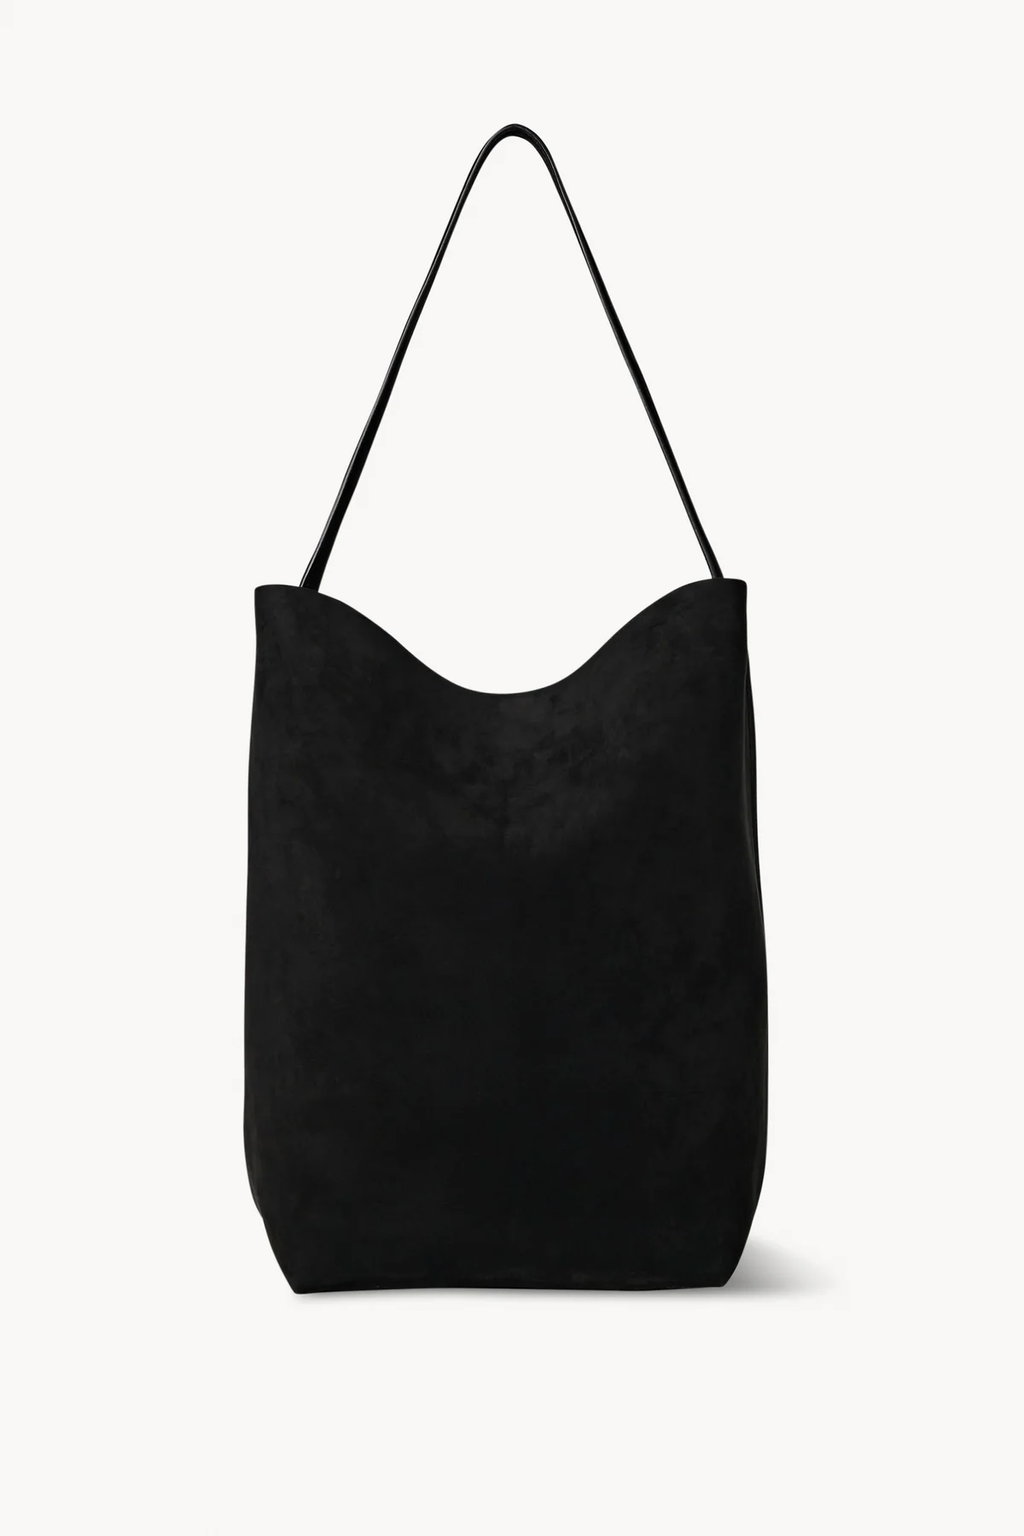 THE ROW Large N/S Park Tote Bag